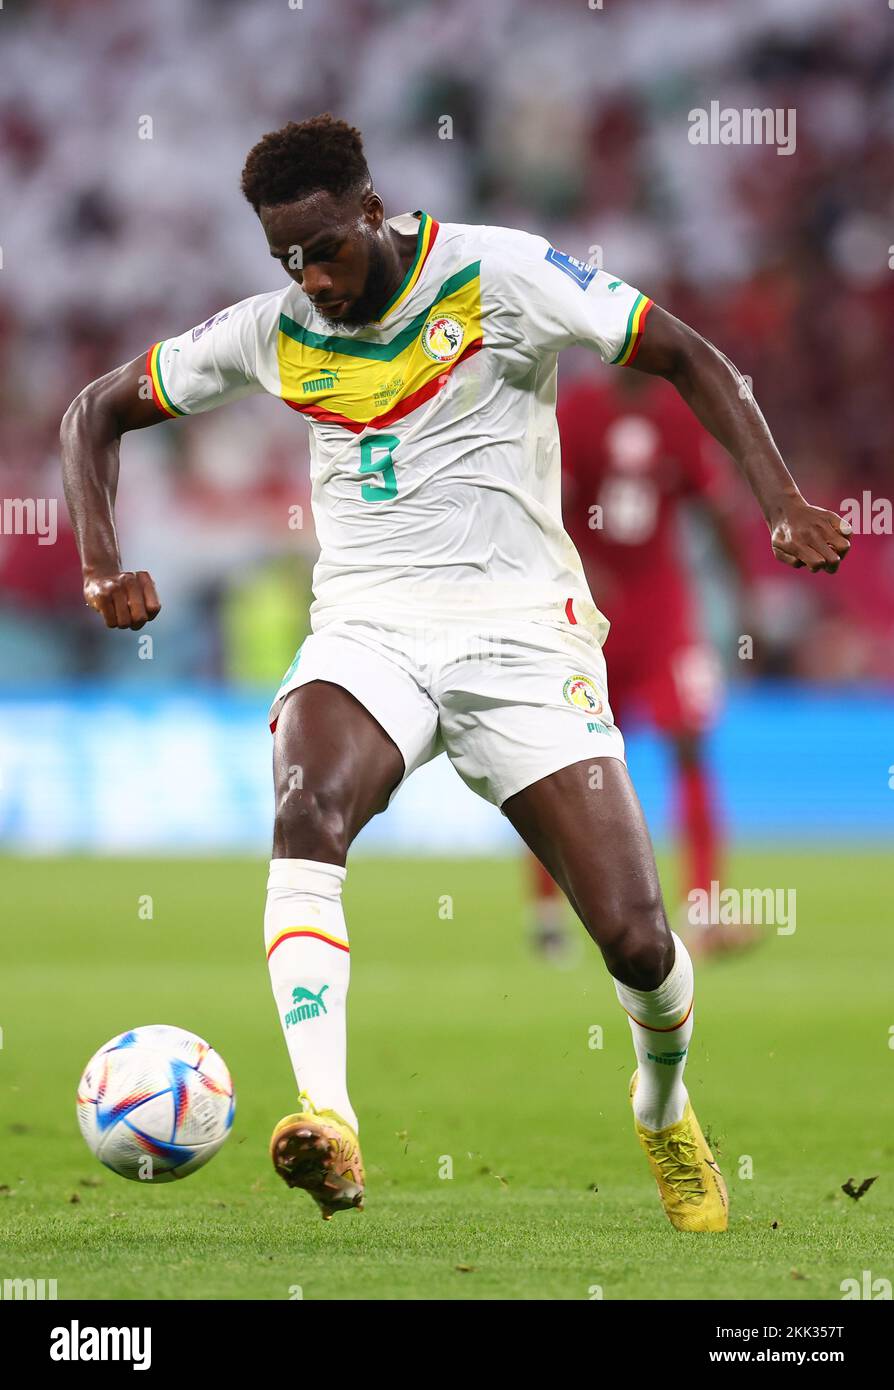 Doha, Qatar, 25th November 2022. Idrissa Gueye of Senegal  during the FIFA World Cup 2022 match at Al Thumama Stadium, Doha. Picture credit should read: David Klein / Sportimage Credit: Sportimage/Alamy Live News Credit: Sportimage/Alamy Live News Stock Photo